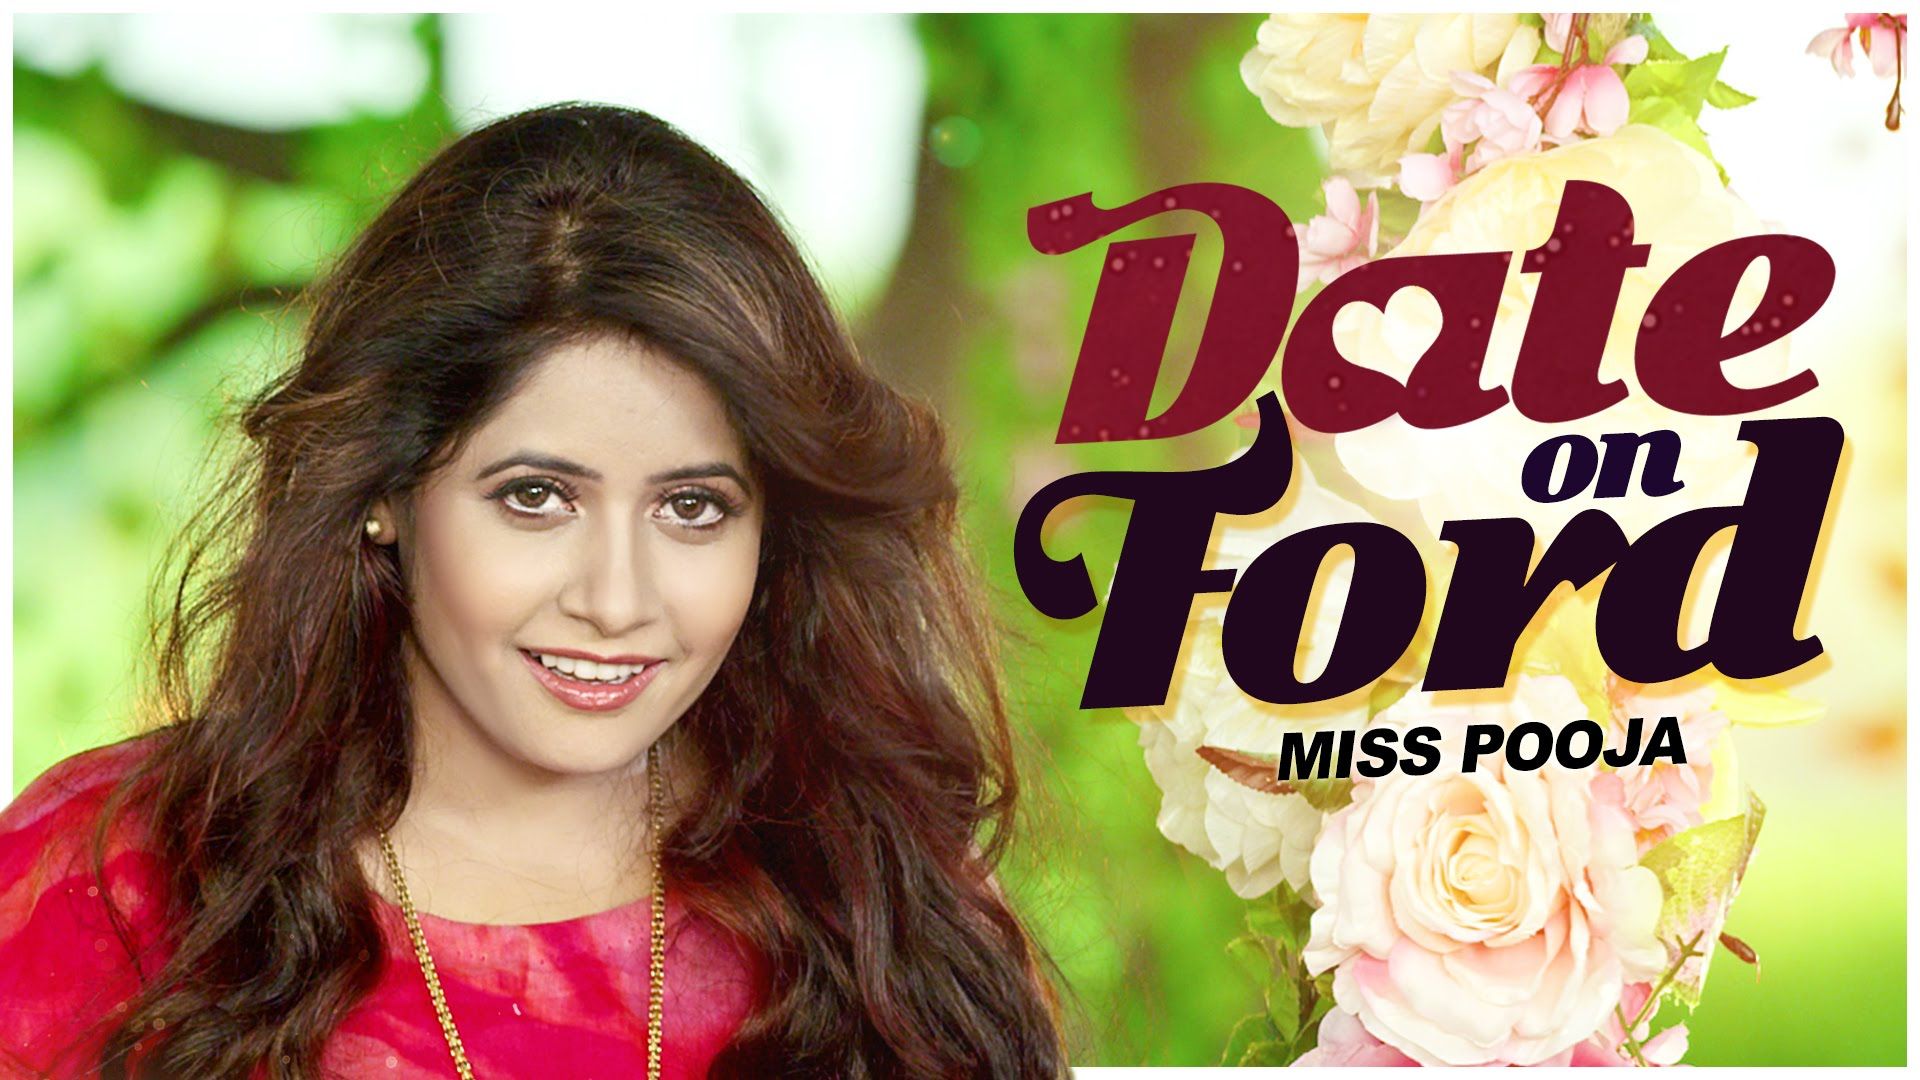 Miss Pooja New Song Date On Ford - 1920x1080 Wallpaper 